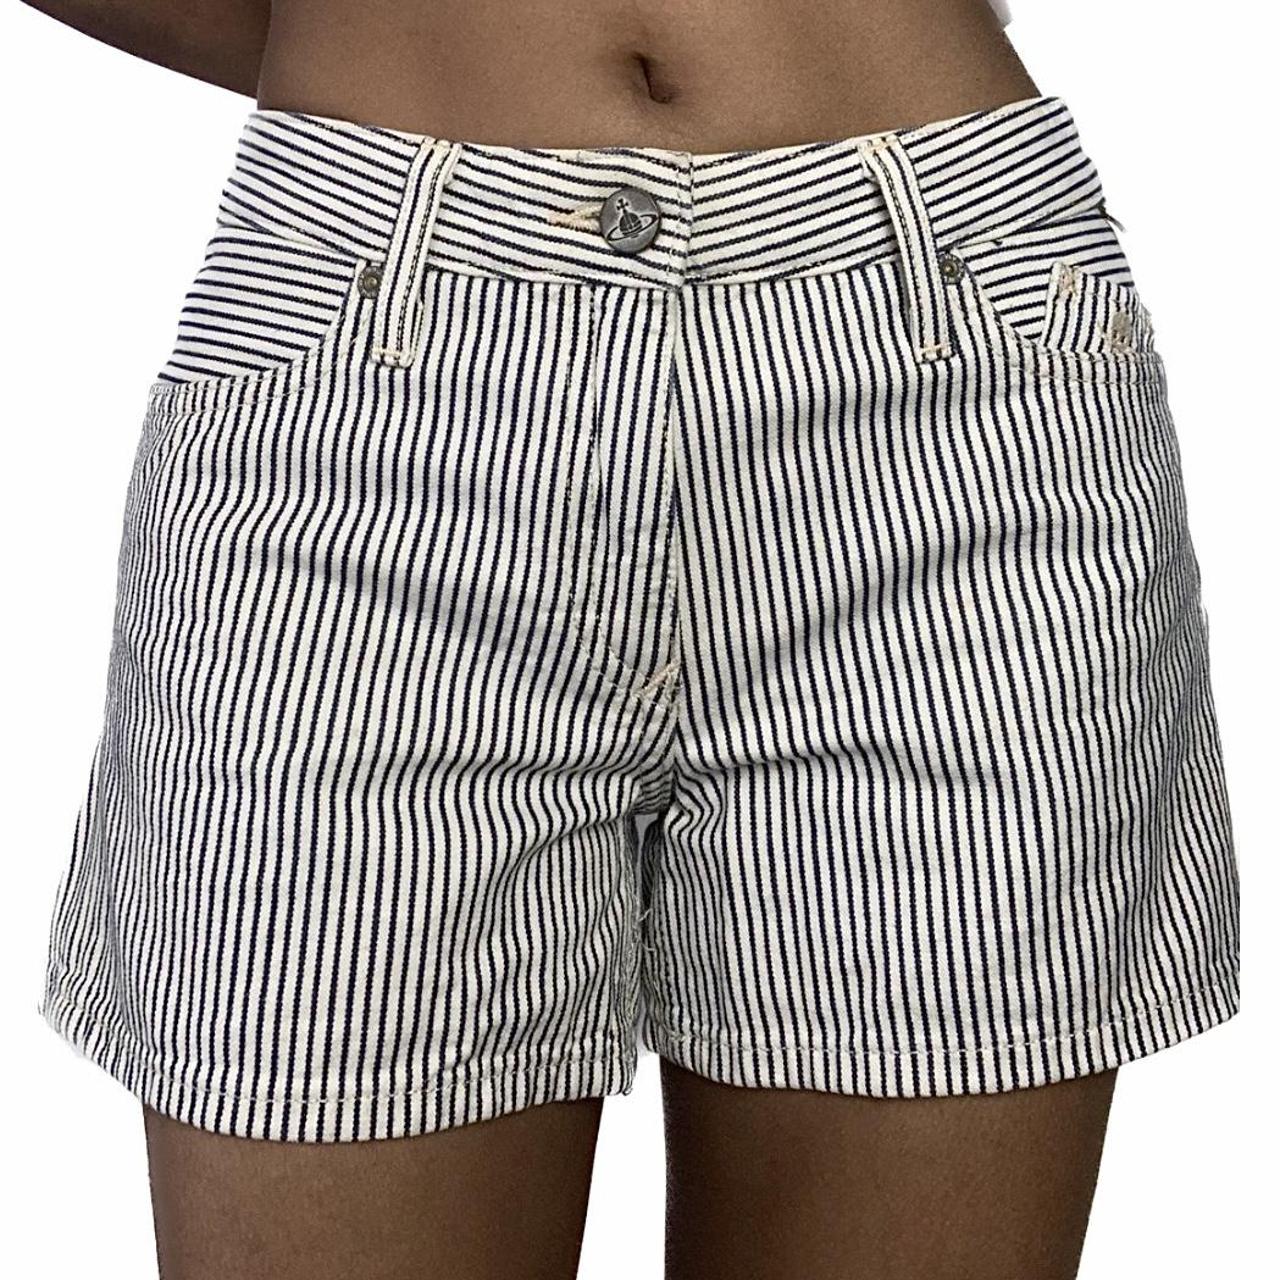 Vivienne Westwood Women's White and Navy Shorts